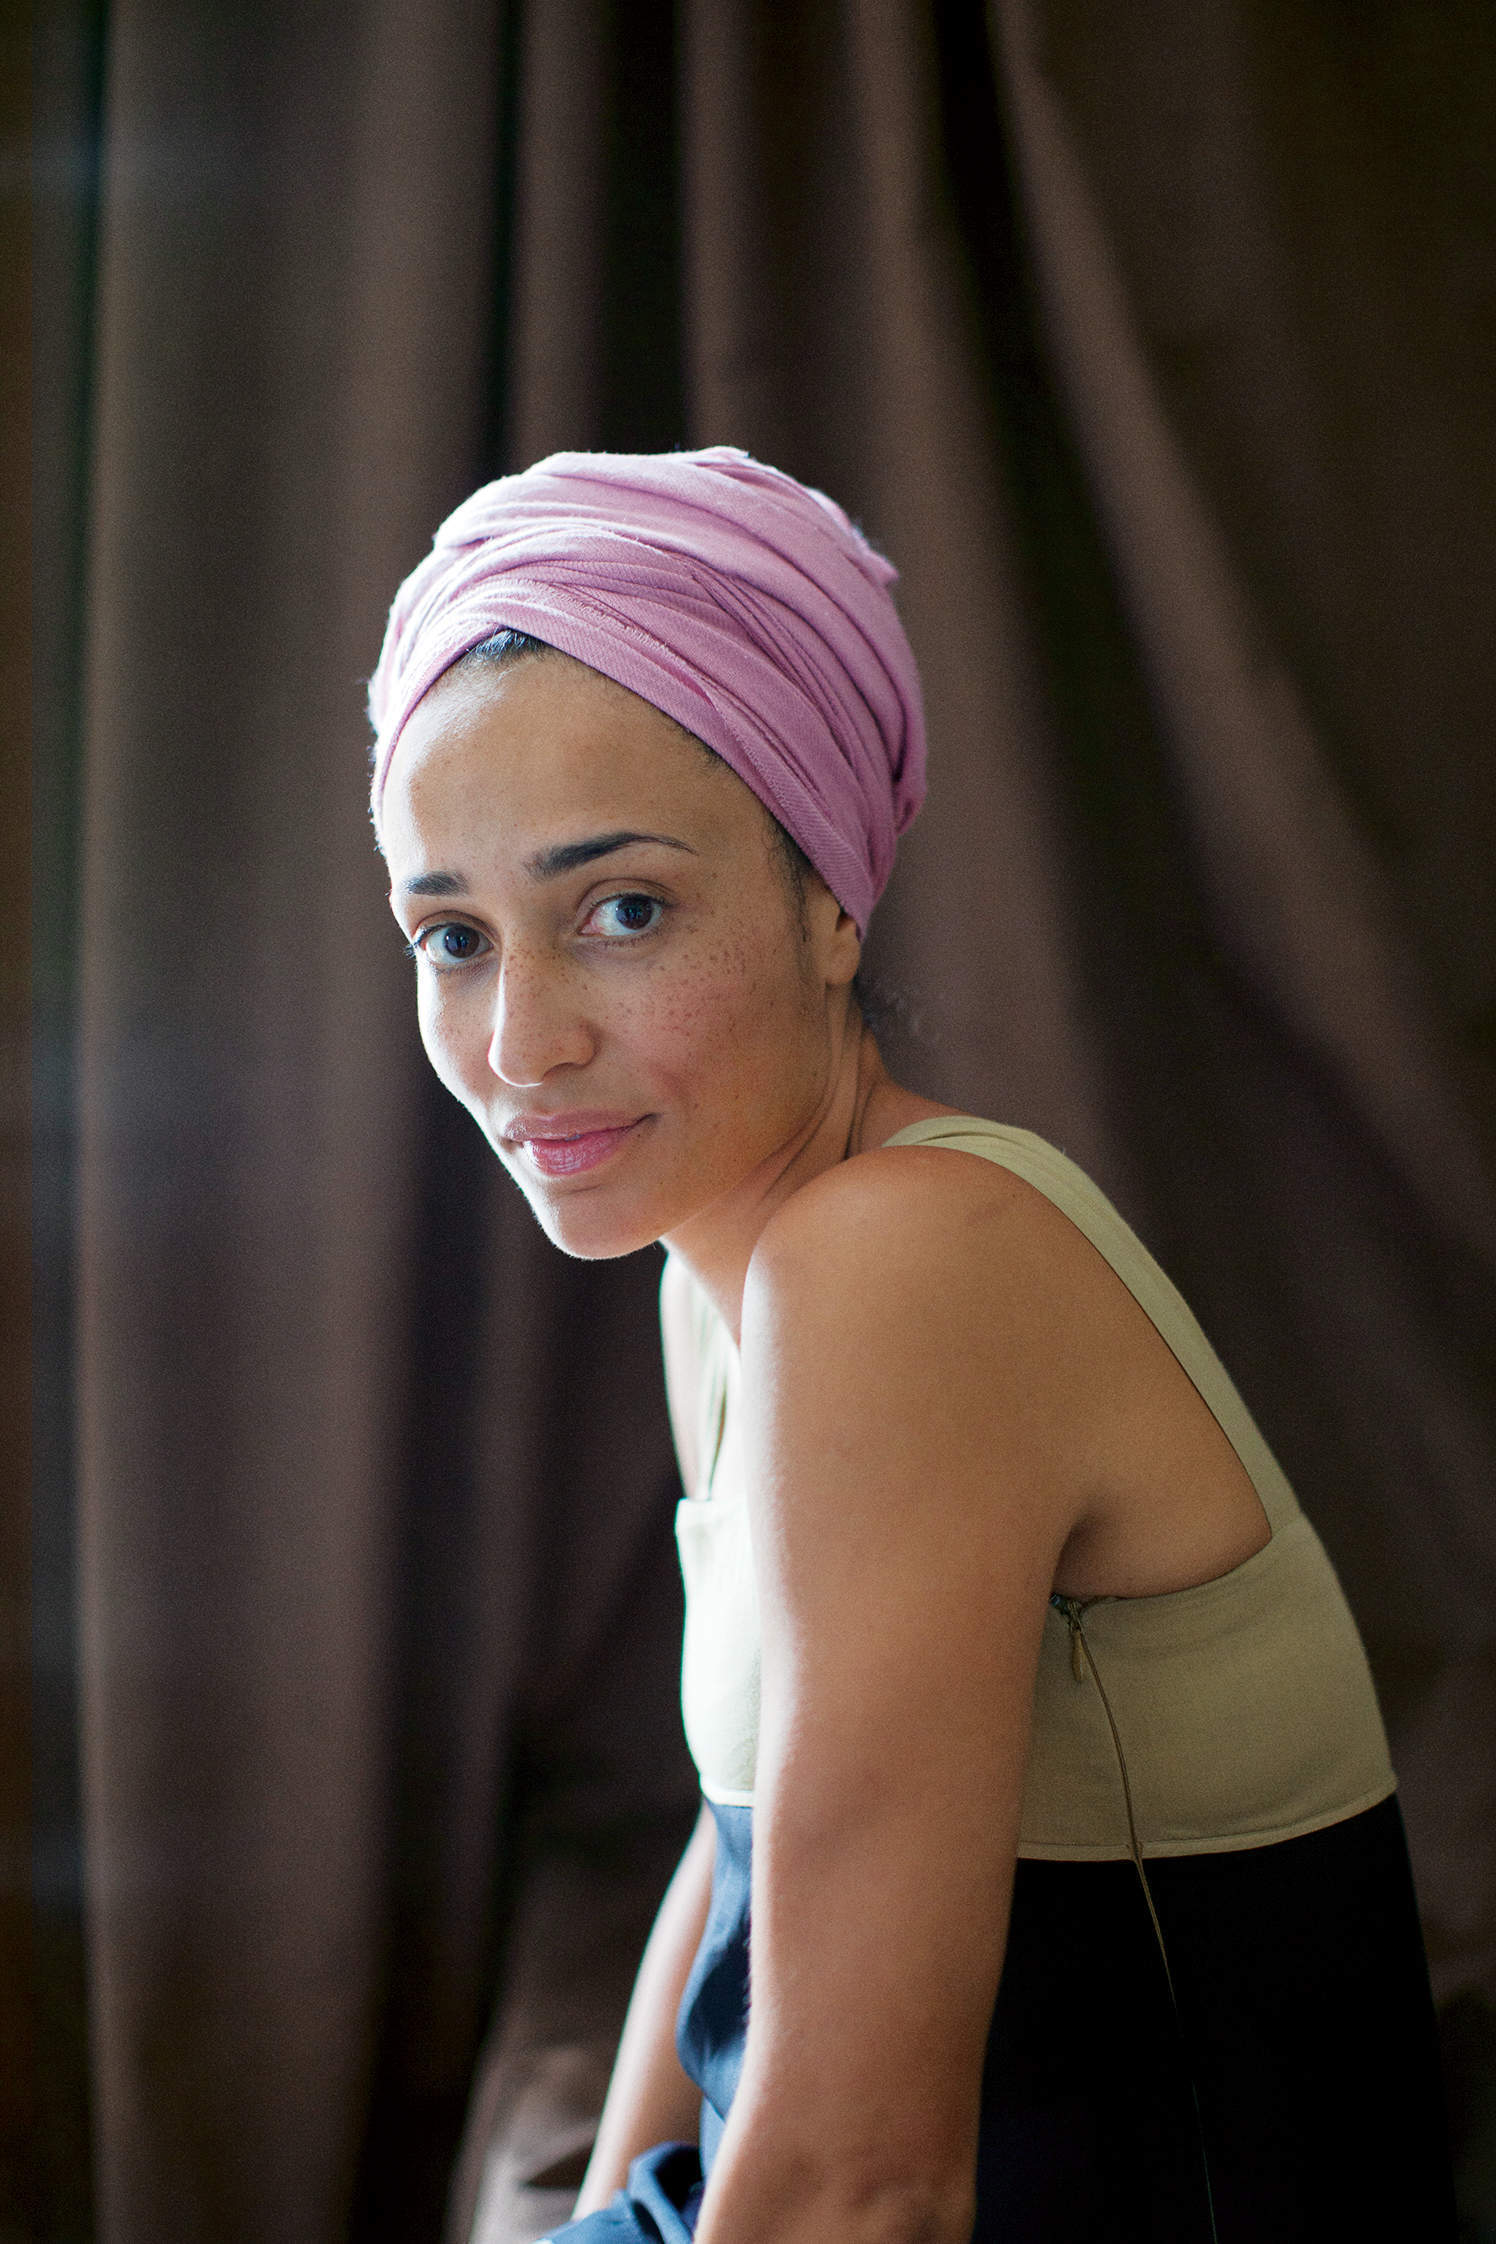 “Trump is a great opportunity for us writers“: Zadie Smith on fighting back